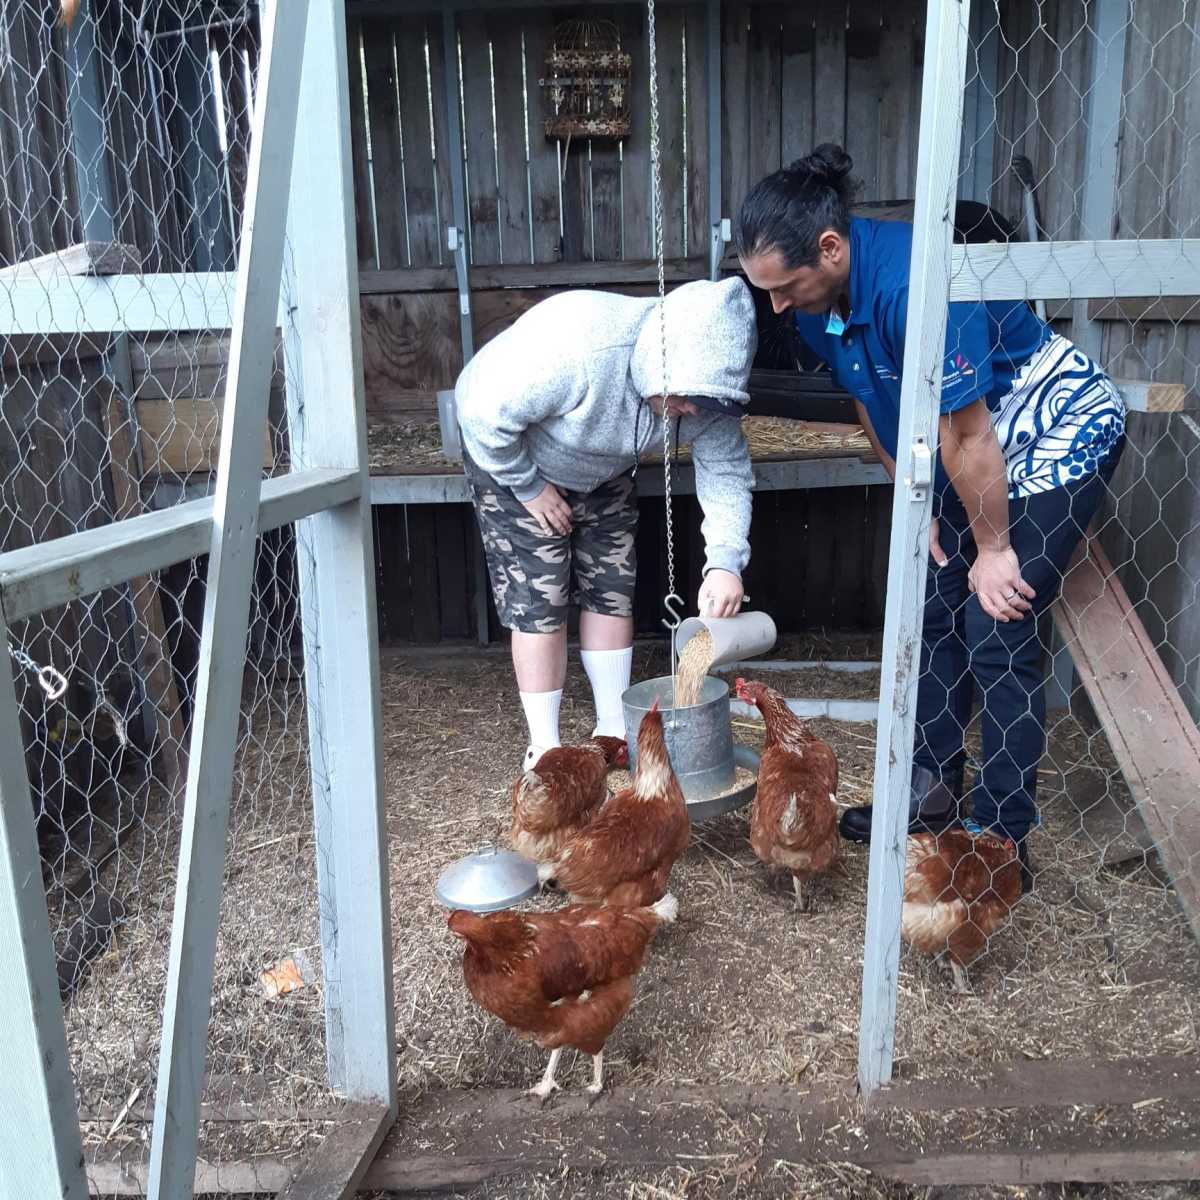 Bradley and Eduardo stand inside a chicken coop. Bradley is bent over pouring feed into the feeder.